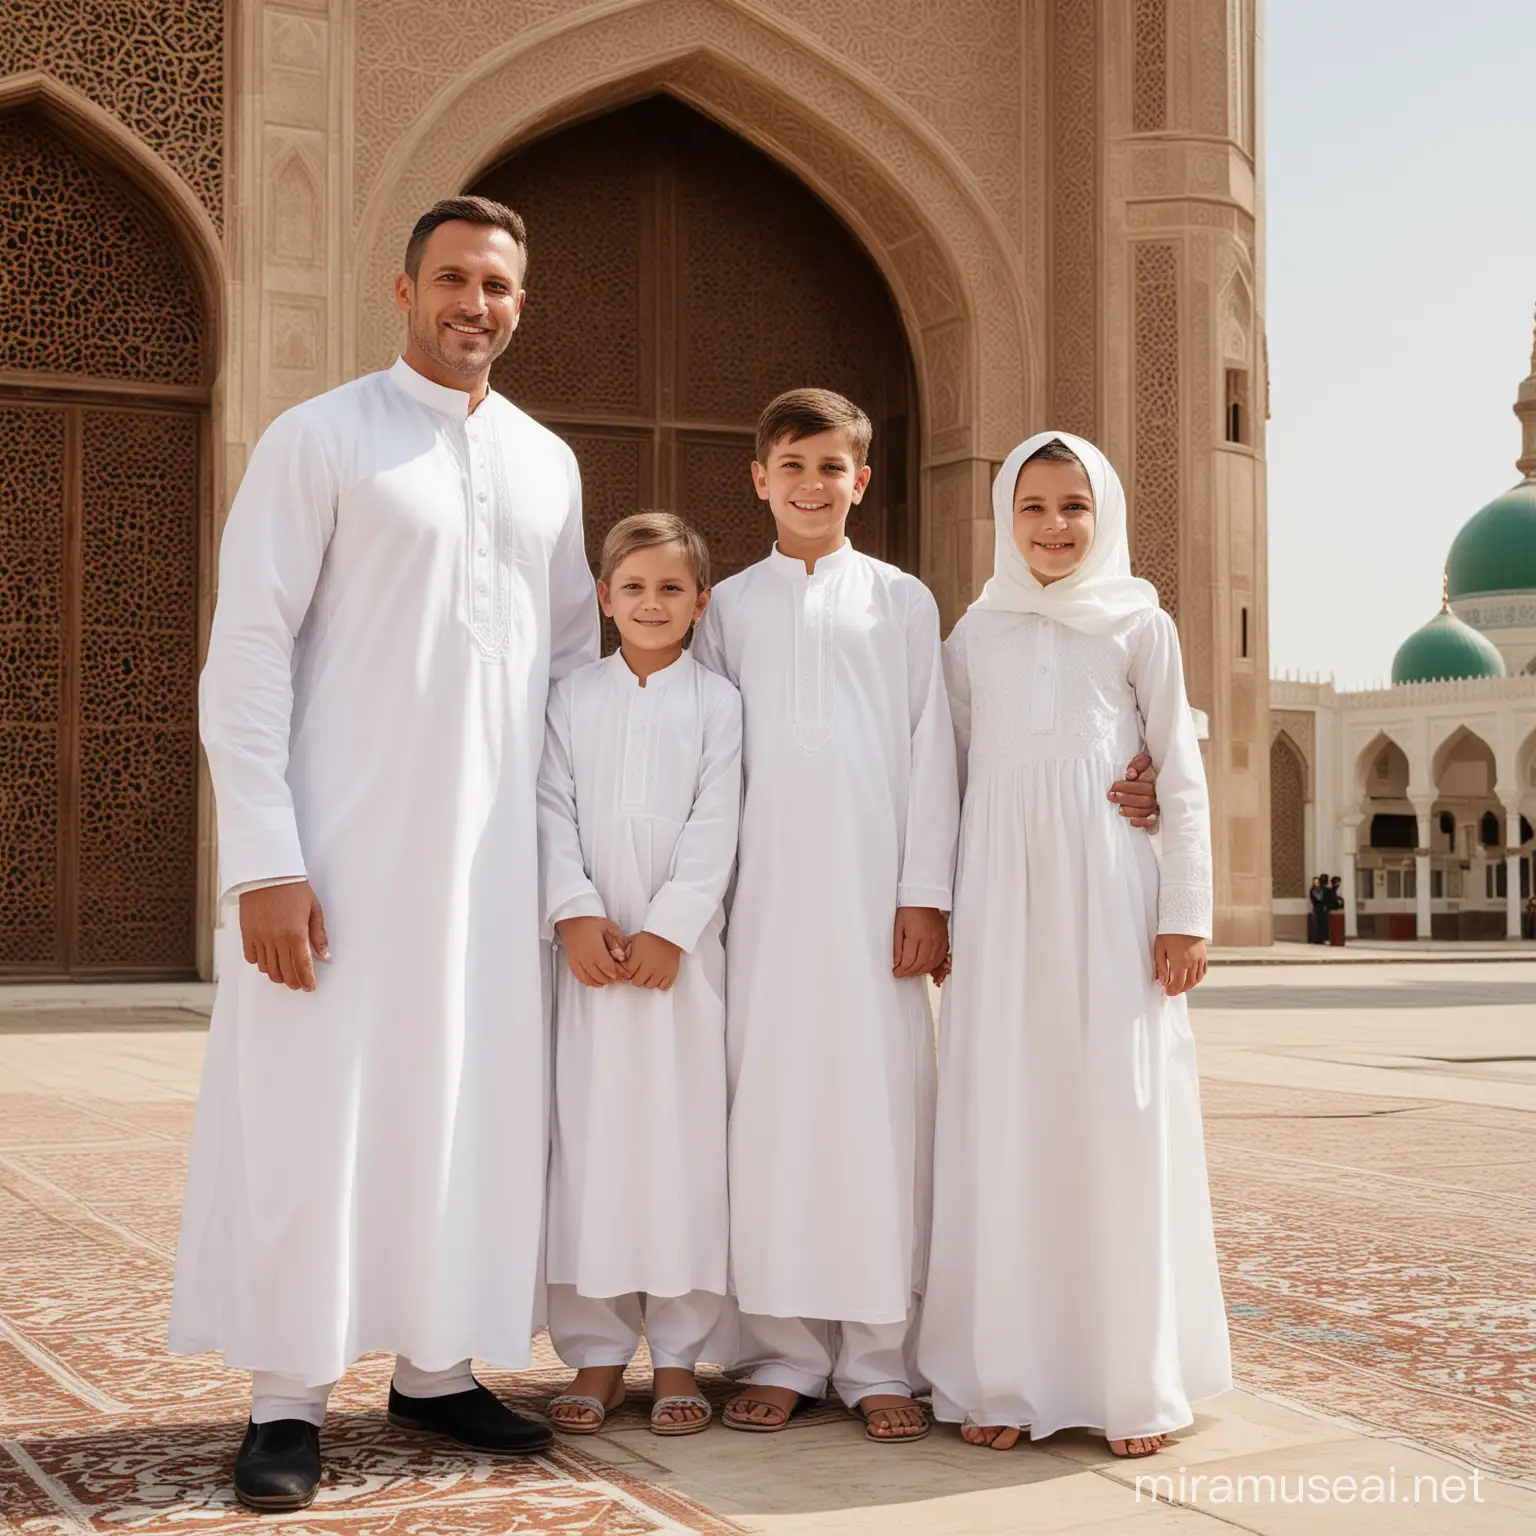 Beautiful Muslim Family Portrait in Front of Mosque